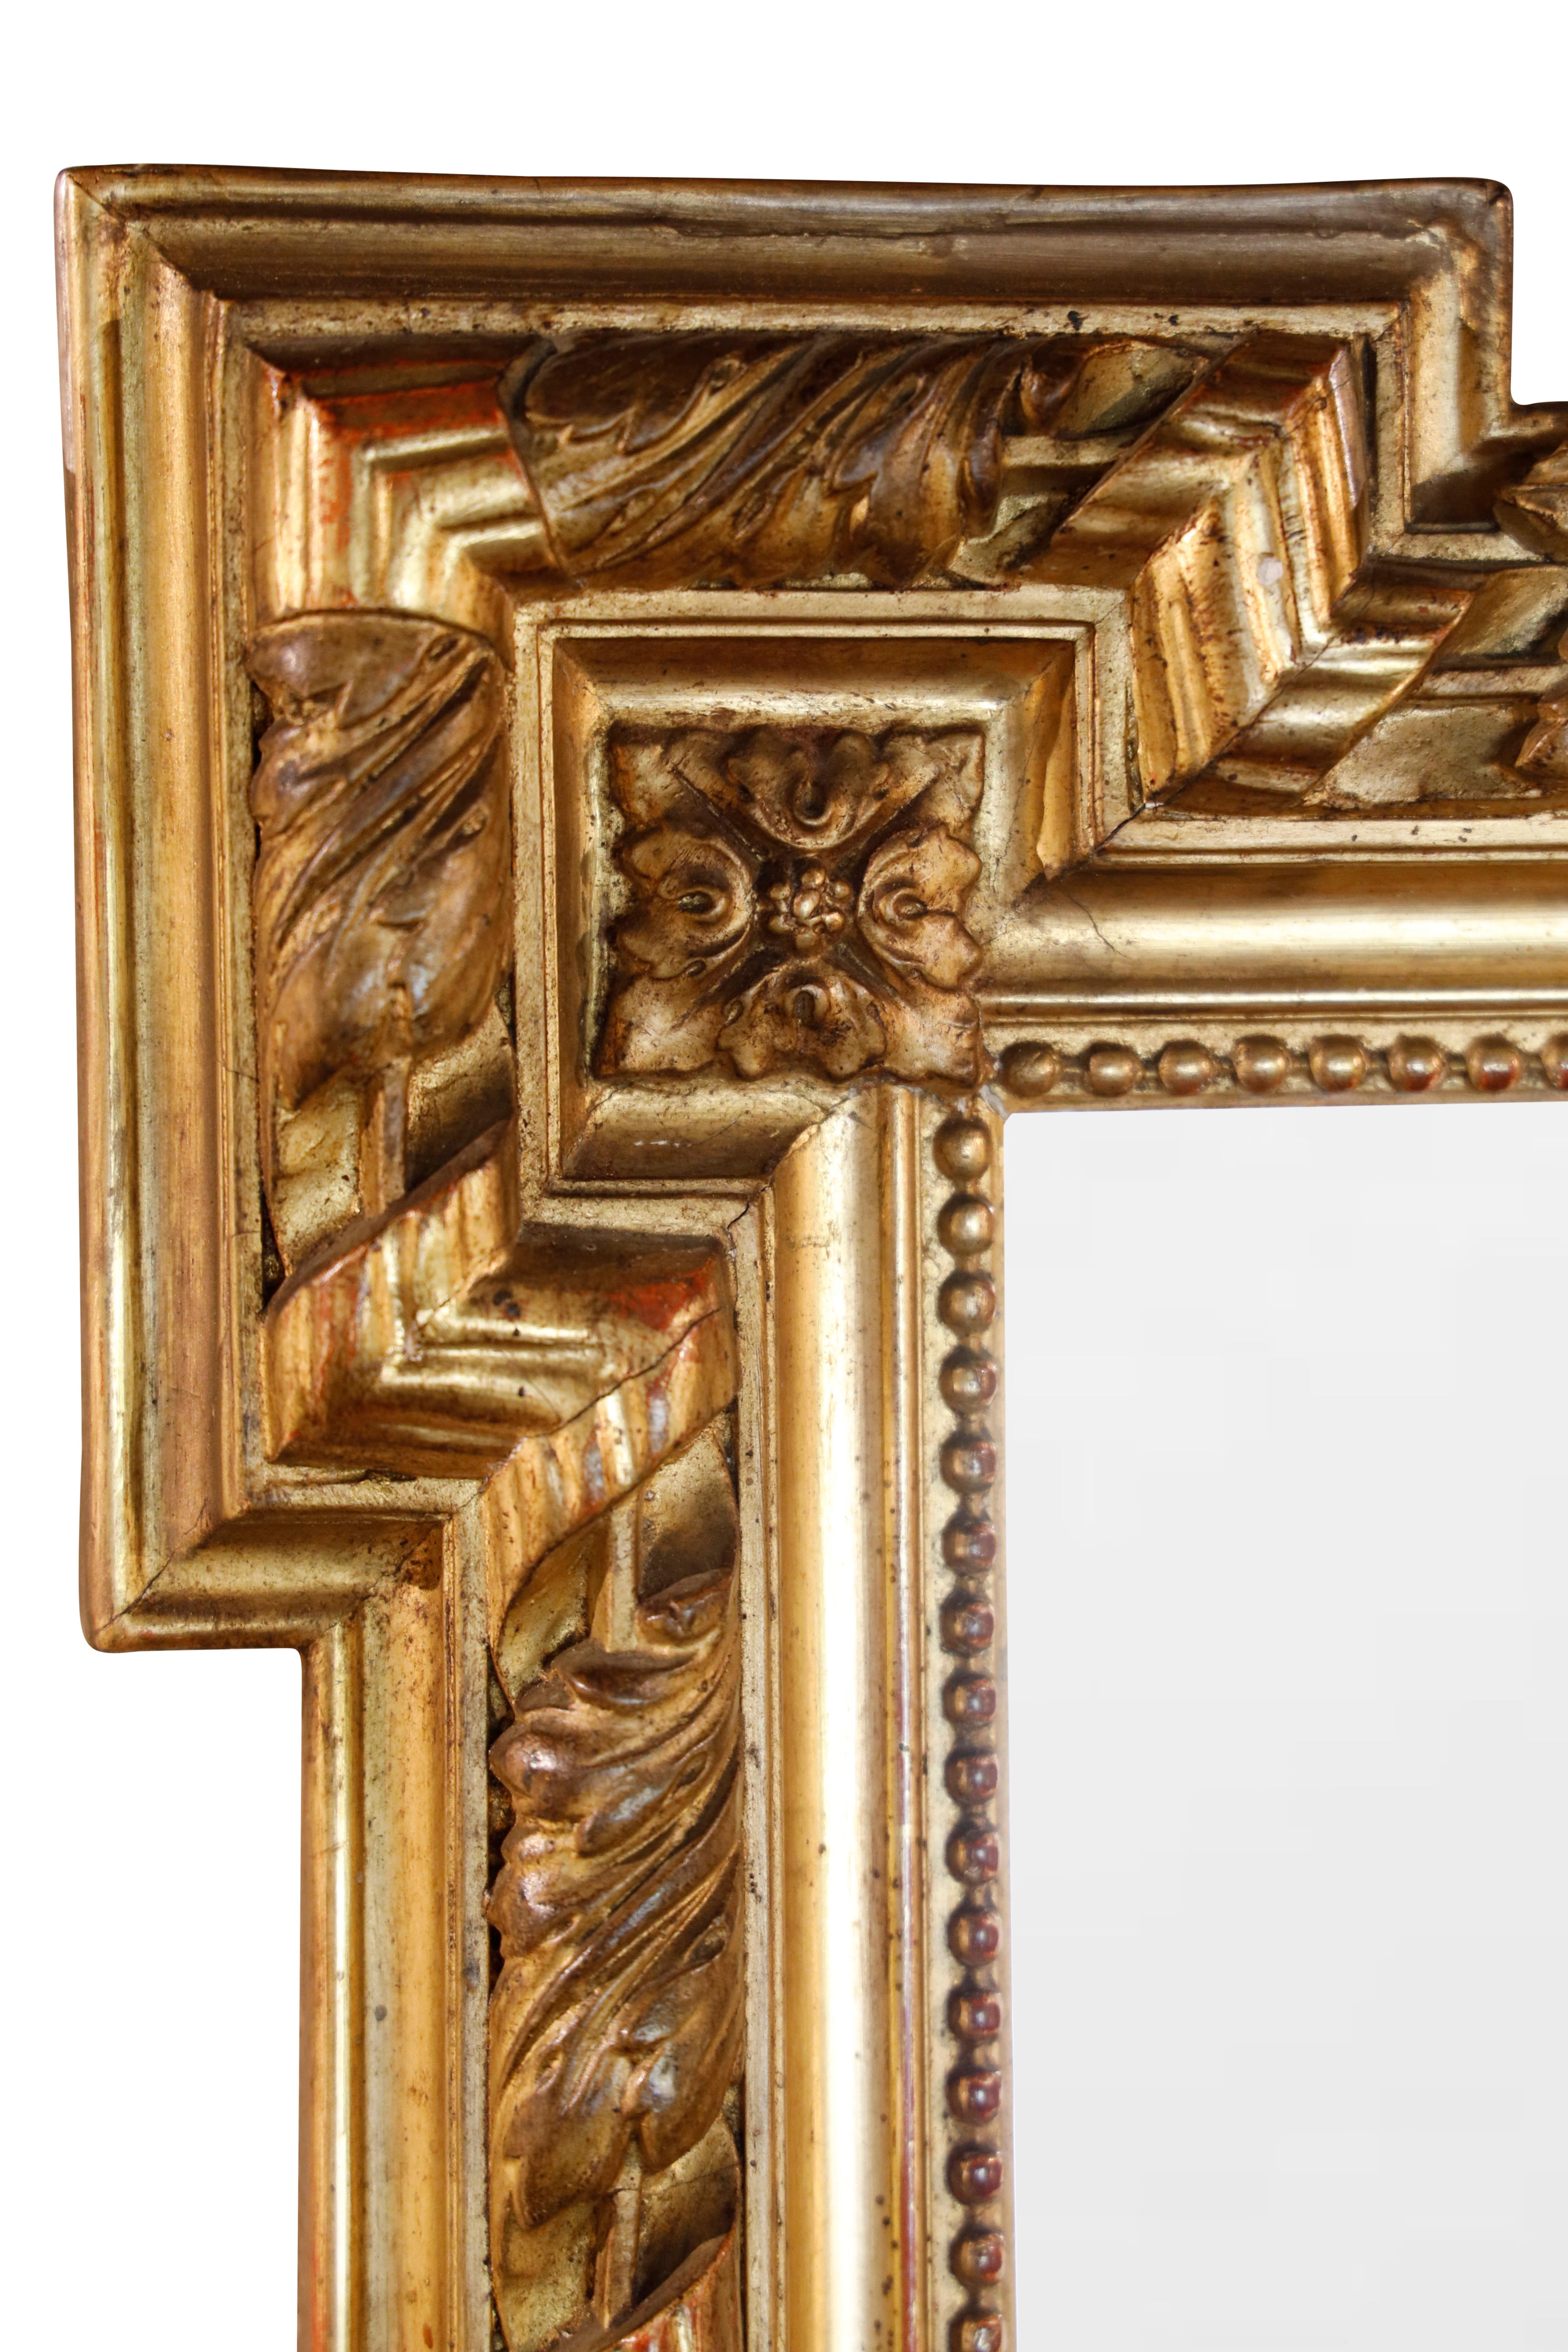 French 19th century giltwood mirror with original glass.  Giltwood frame with beeded and moulded carvings decorated with foliage motifs and center leaf crest.